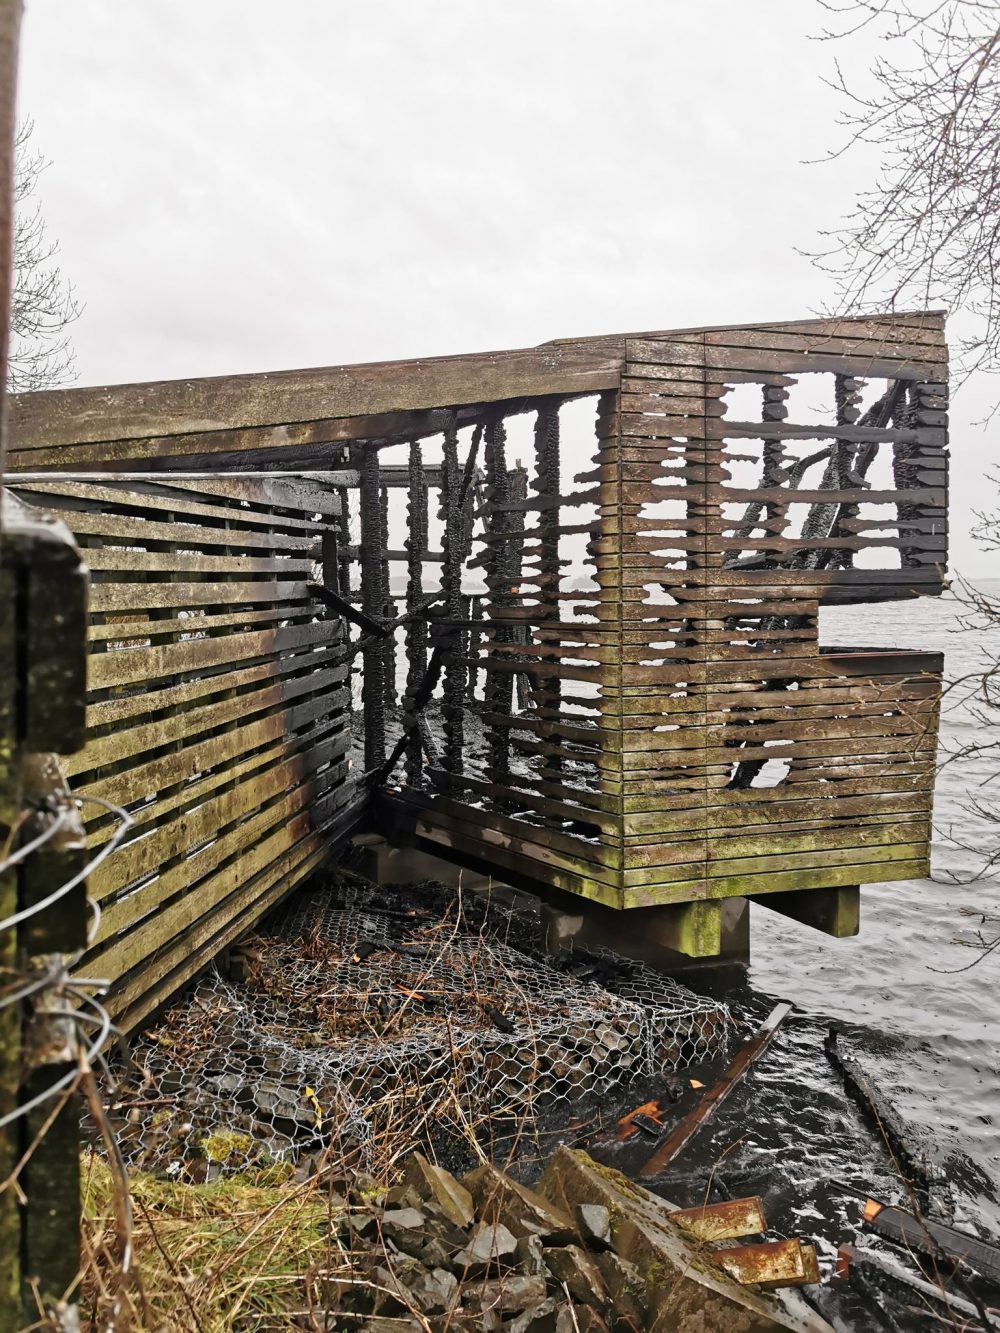 The hide after the fire  © Simon Ritchie NatureScot - Court and Crime News Scotland